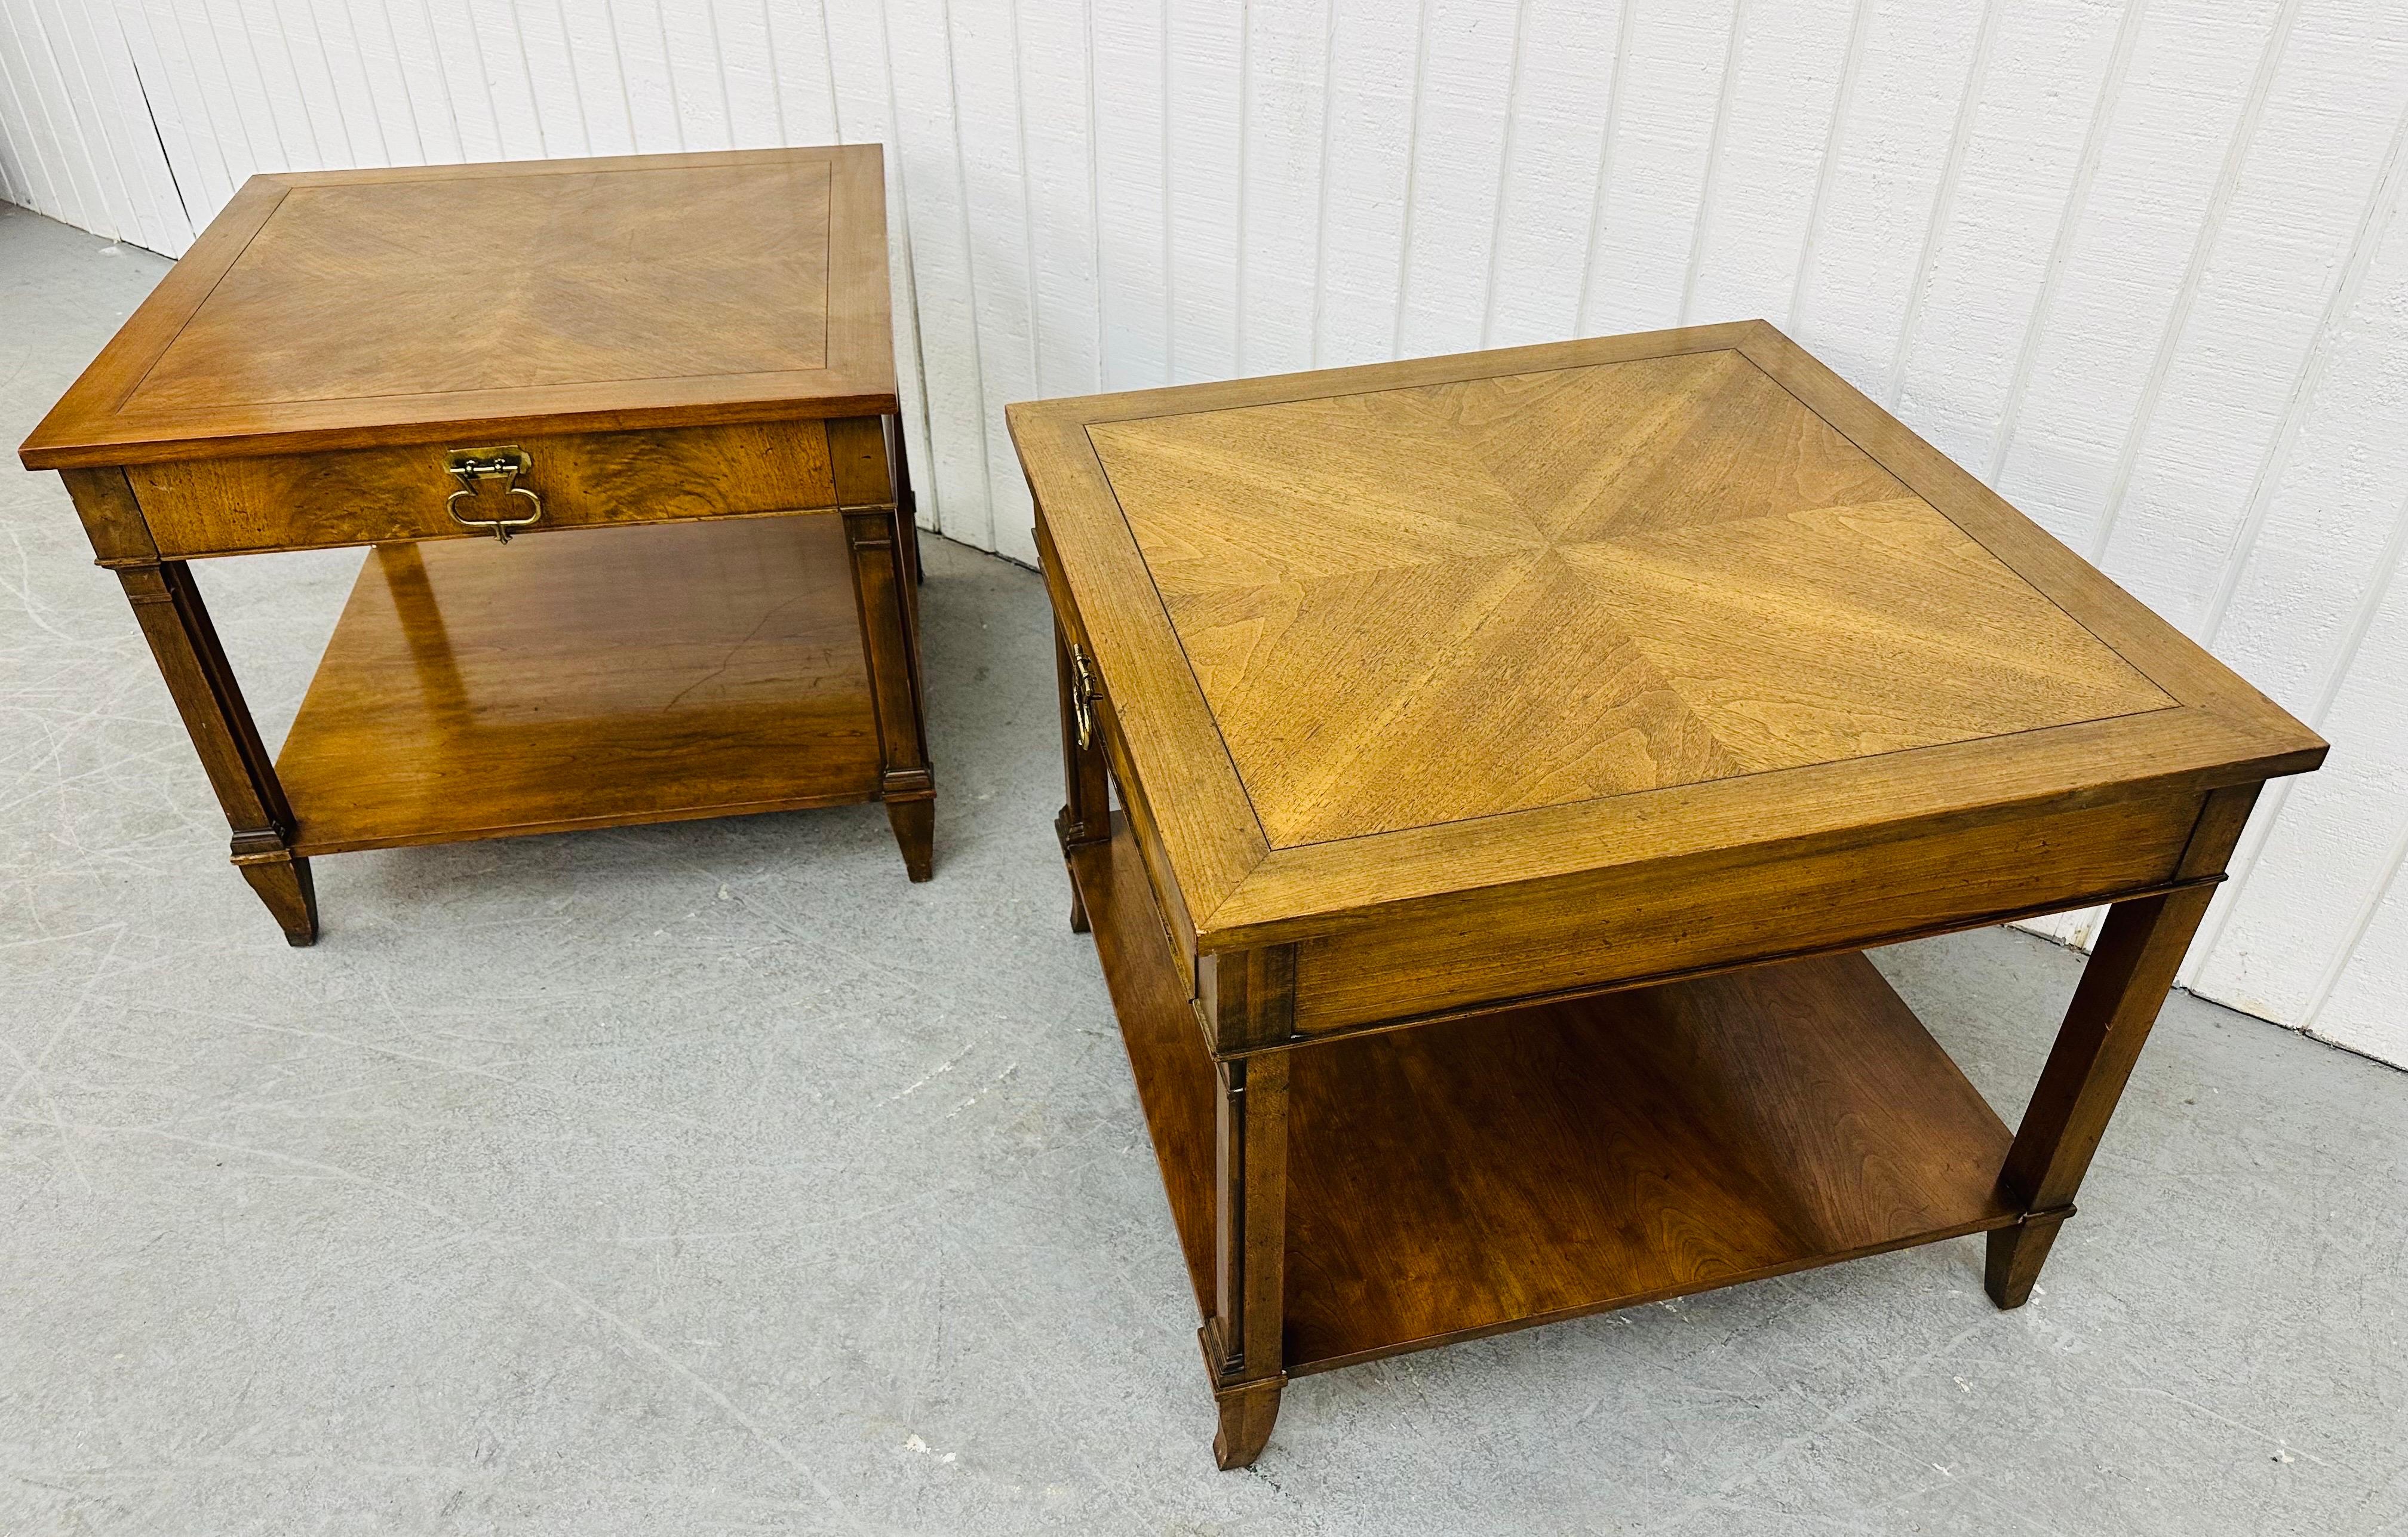 This listing is for a pair of vintage Baker Furniture Square Walnut Side Tables. Featuring a straight line design, square top, single drawer with original brass pull, bottom tier for storage space, and a beautiful walnut finish. This is an